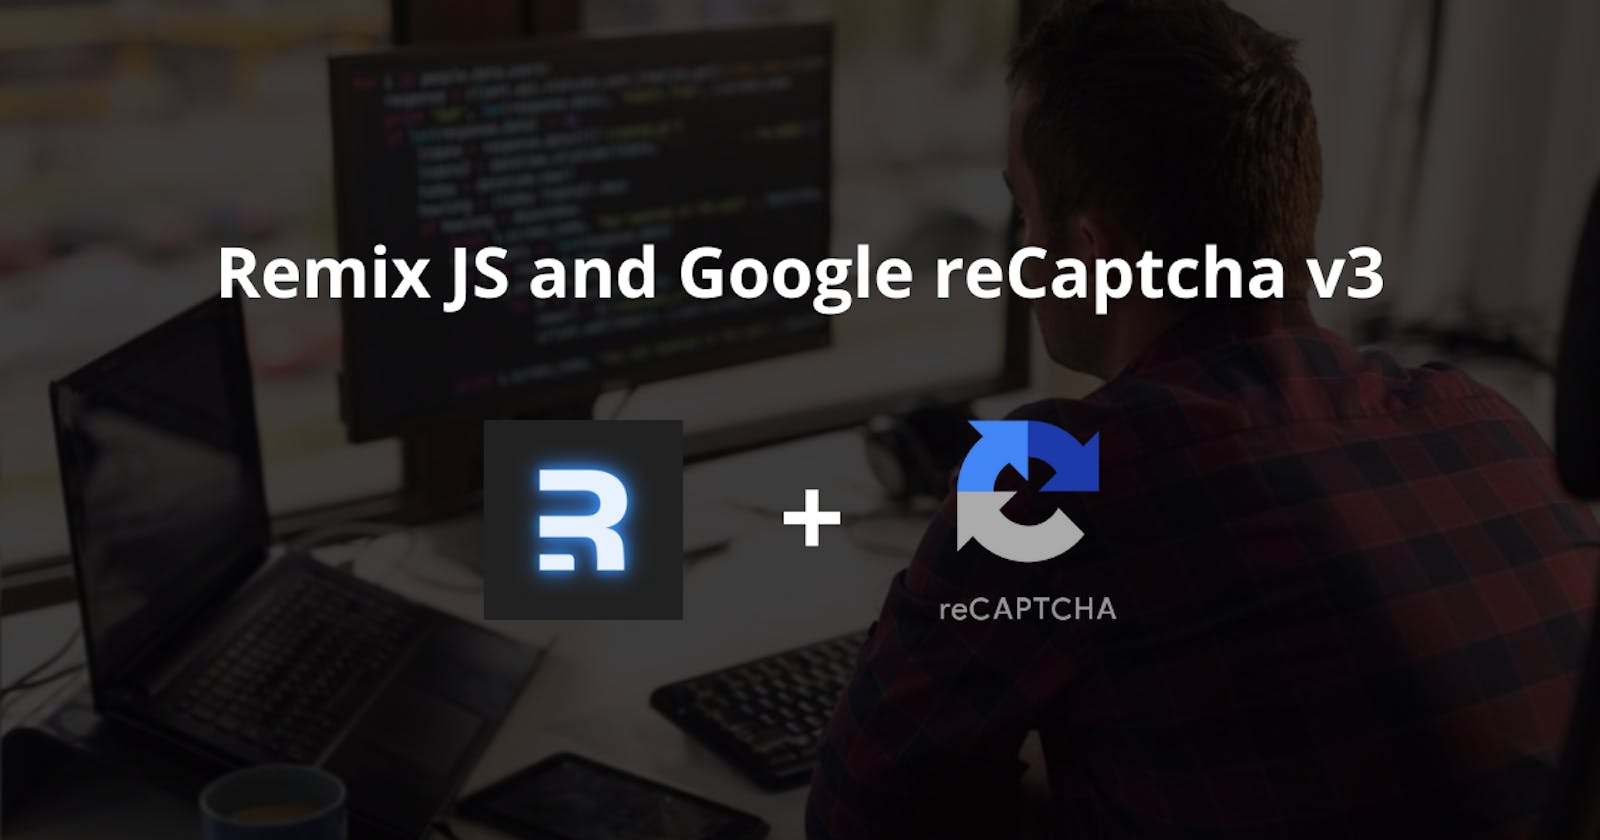 How to add Google Recaptcha v3 to your Remix JS contact form